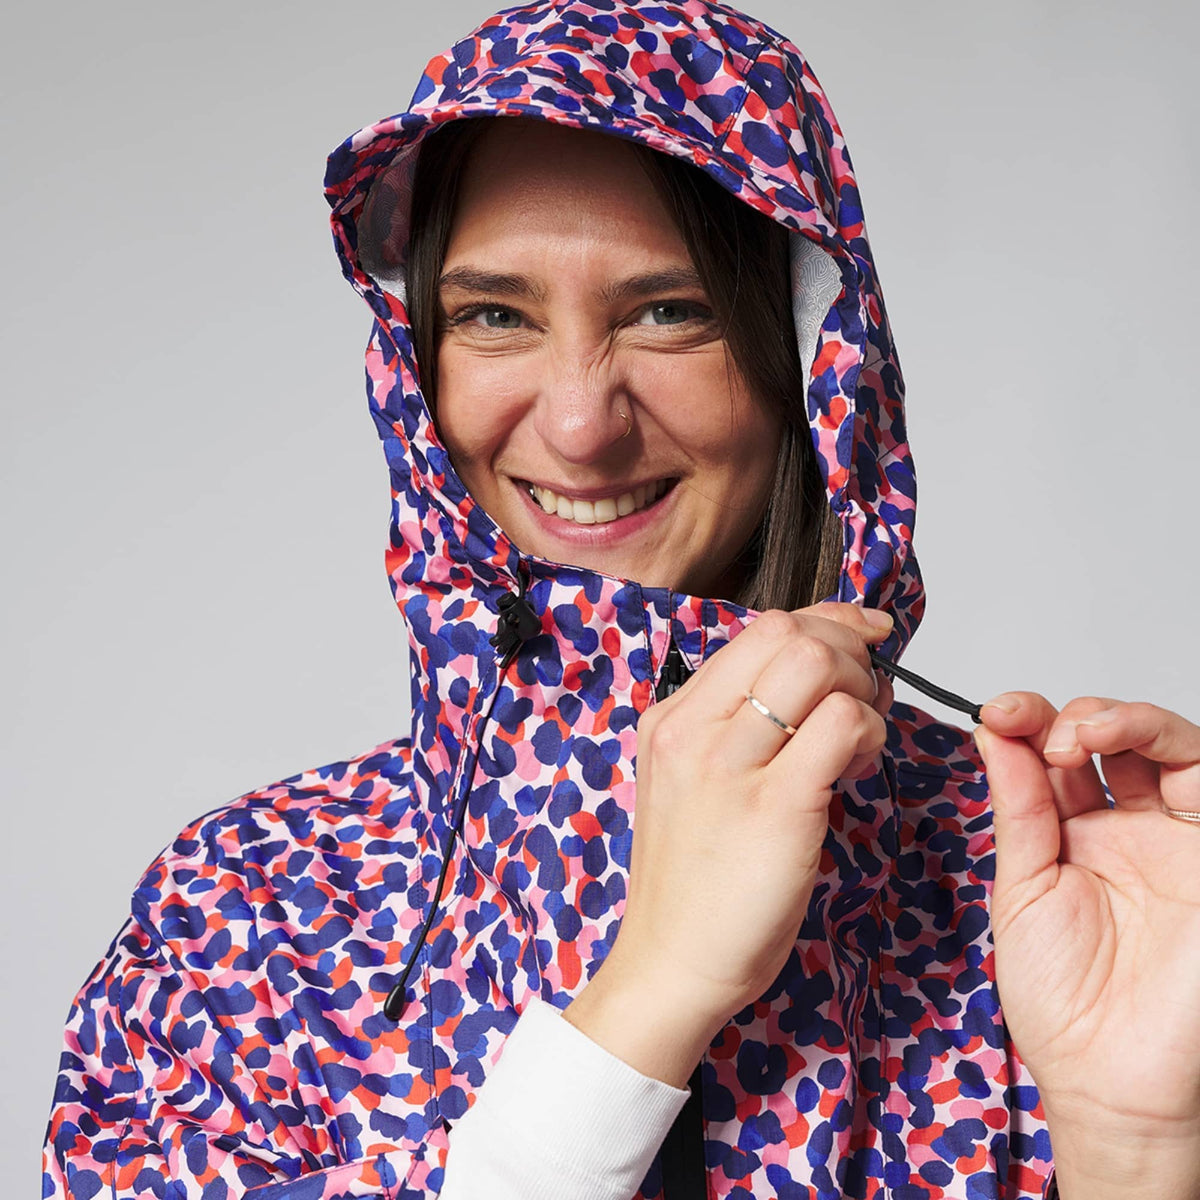 VOITED Rain Poncho - Water-Resistant & Packable - Confetti